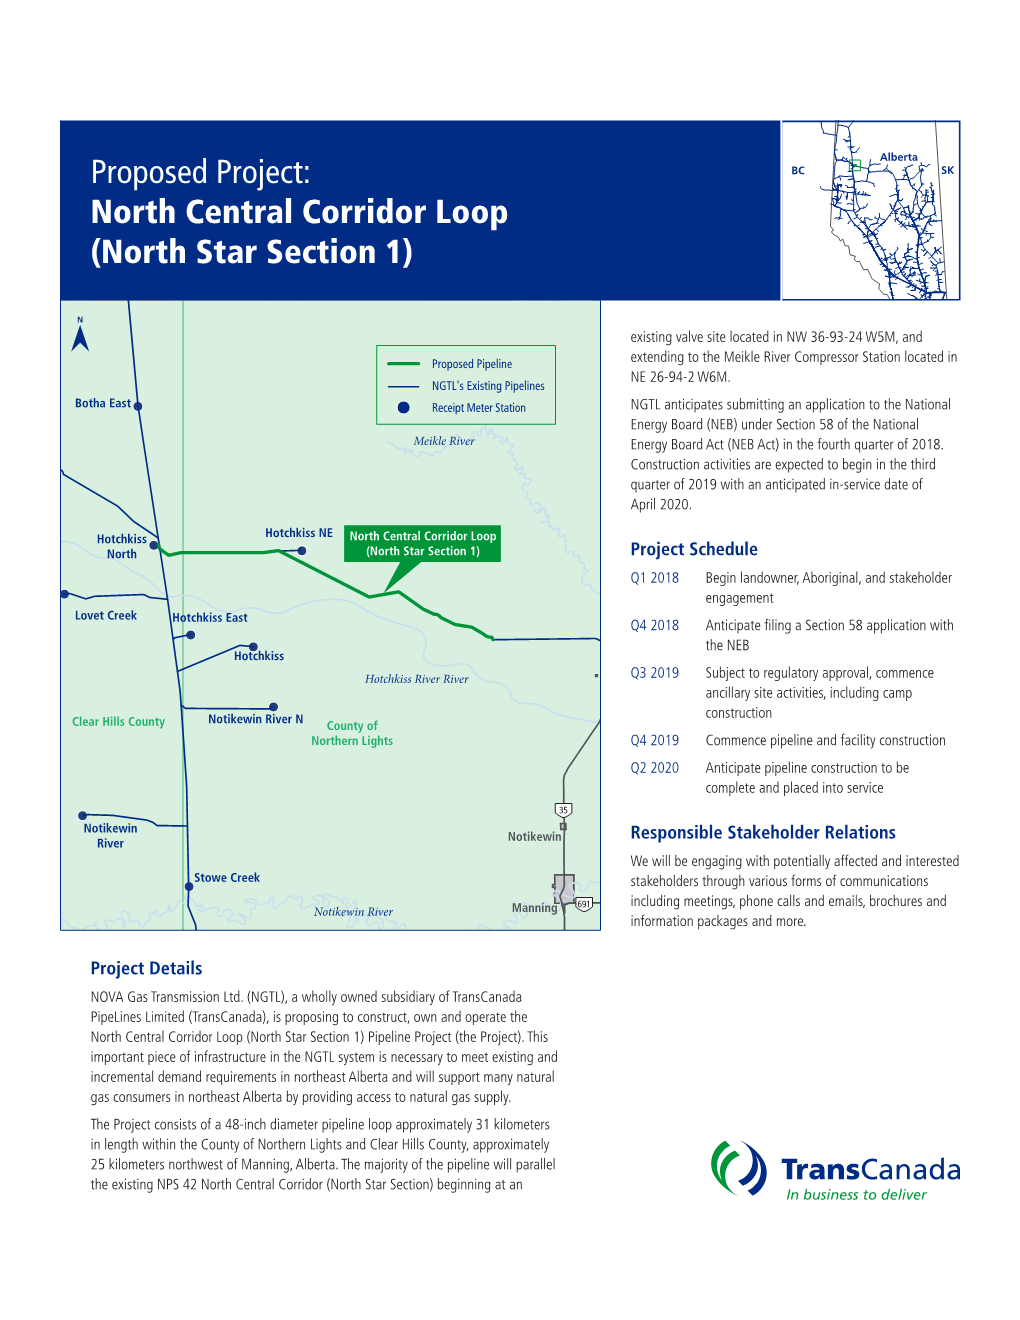 Proposed Project: North Central Corridor Loop (North Star Section 1)